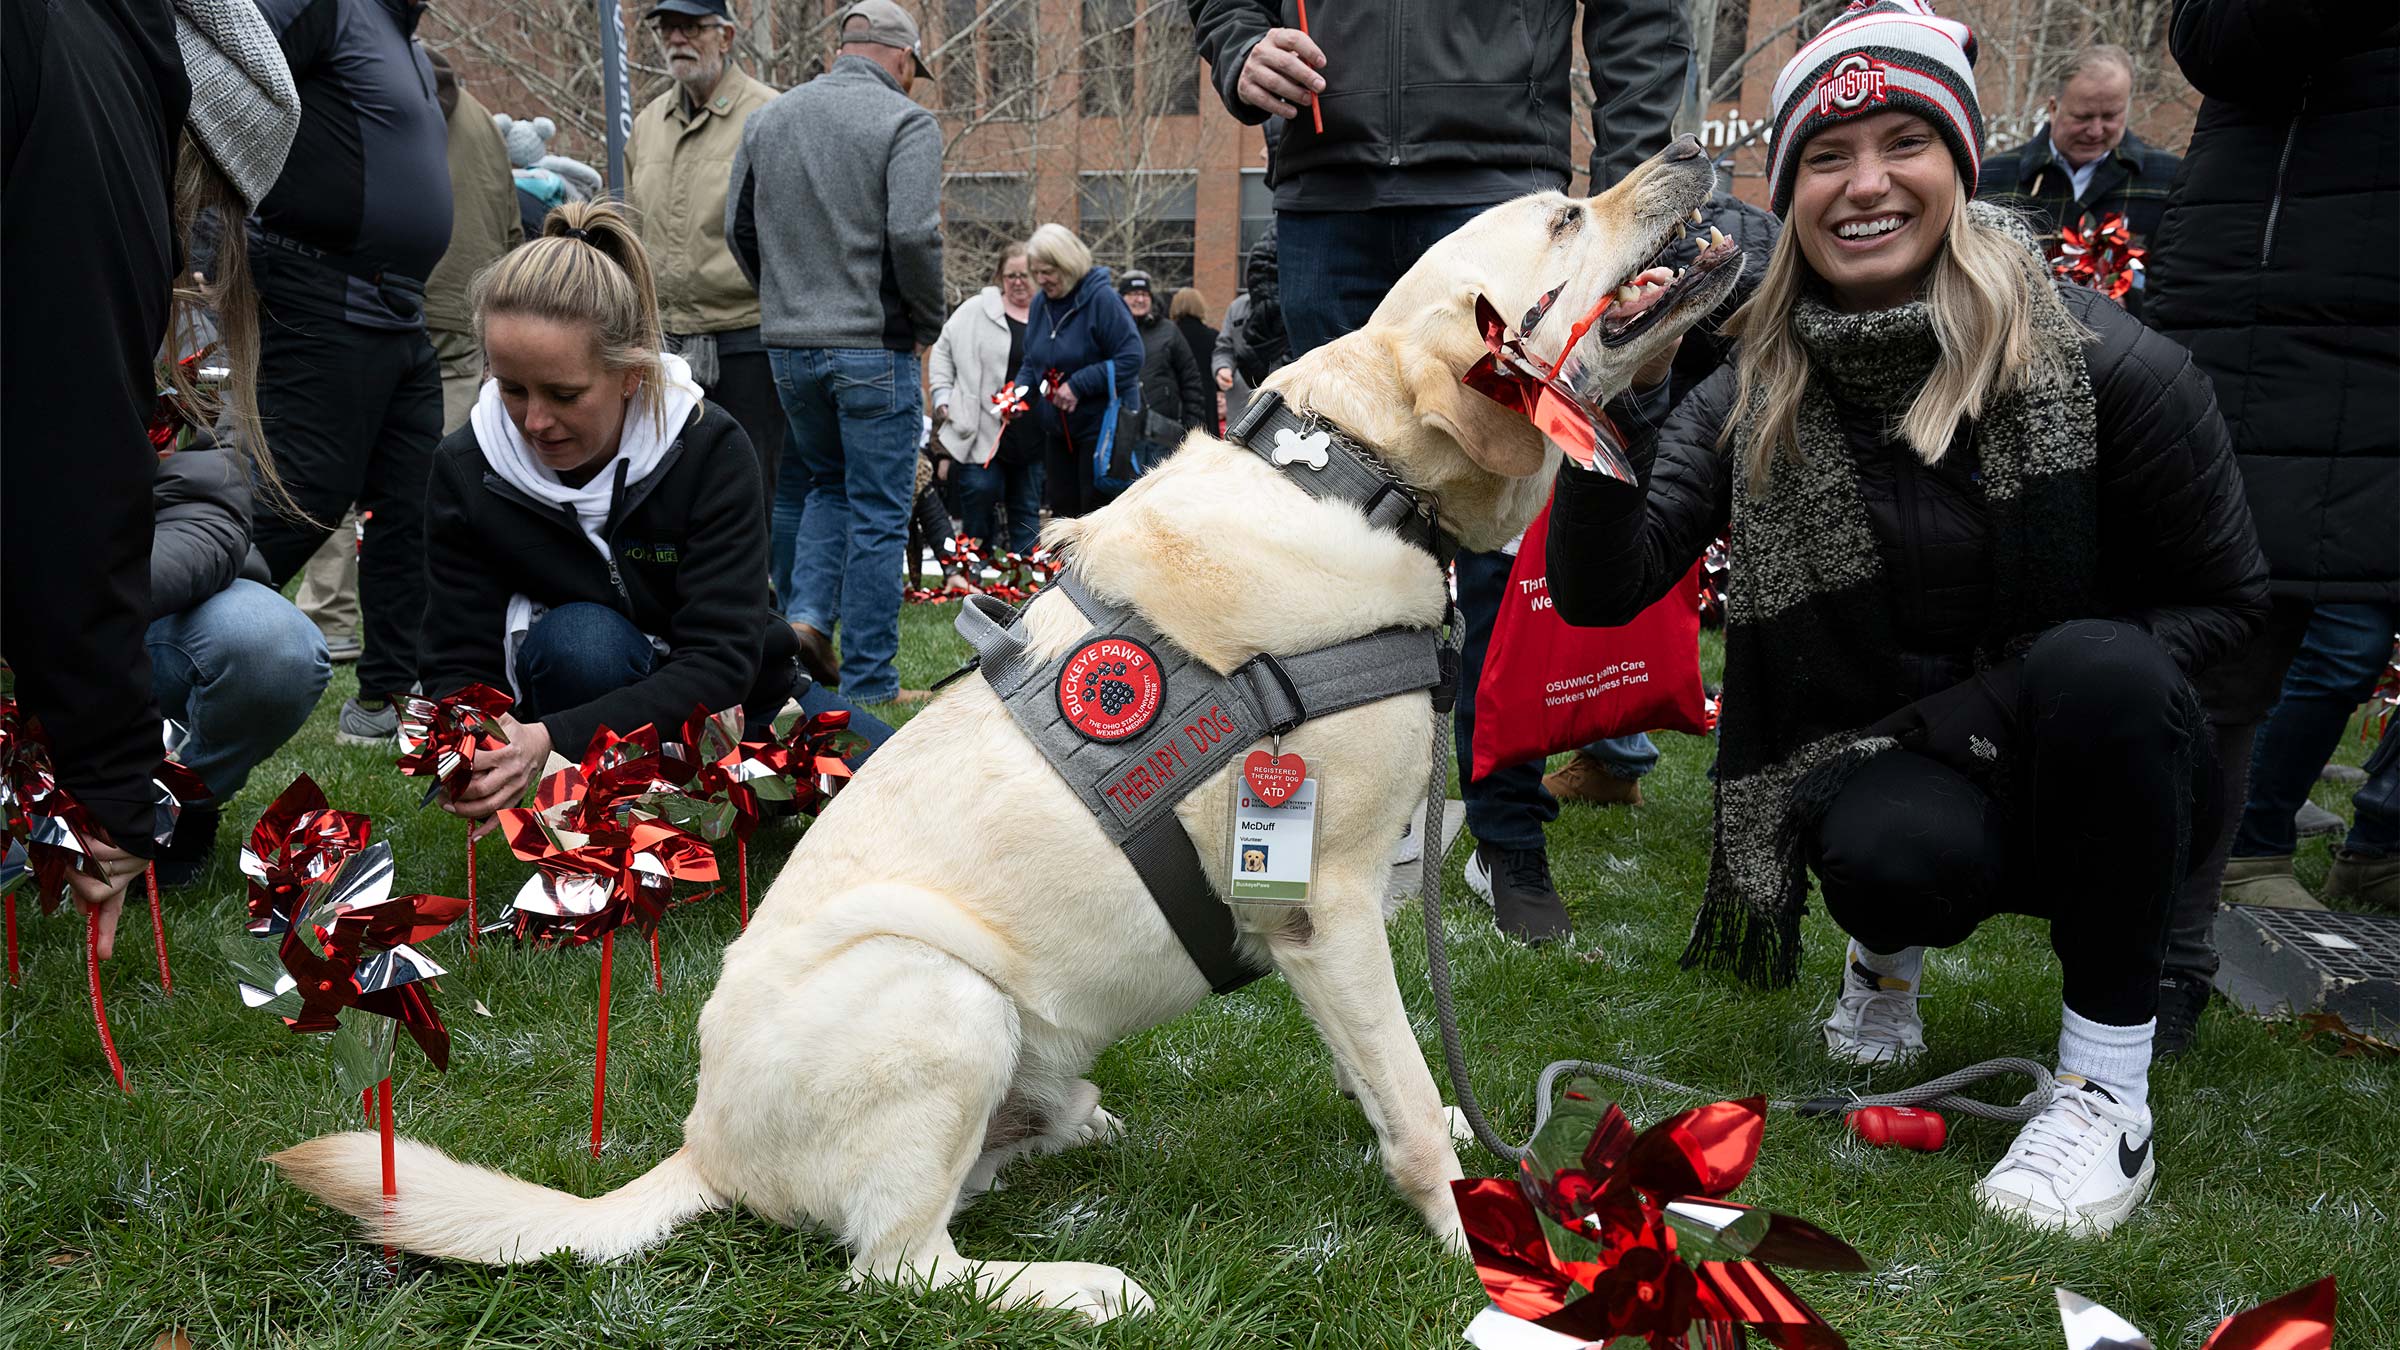 Lady sitting with a Buckeye Paws therapy dog